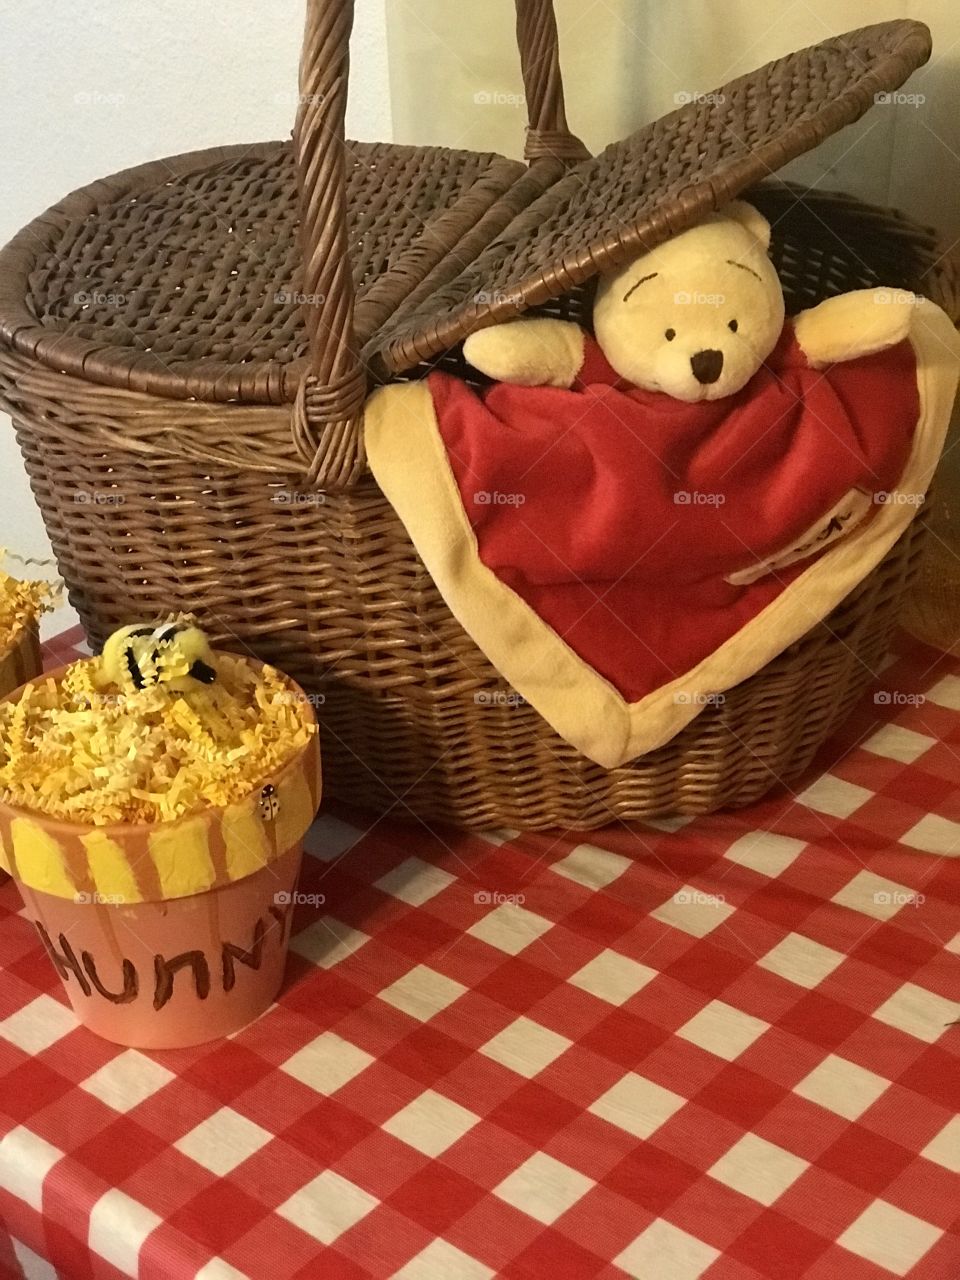 Winnie the Pooh picnic baby shower decorations 